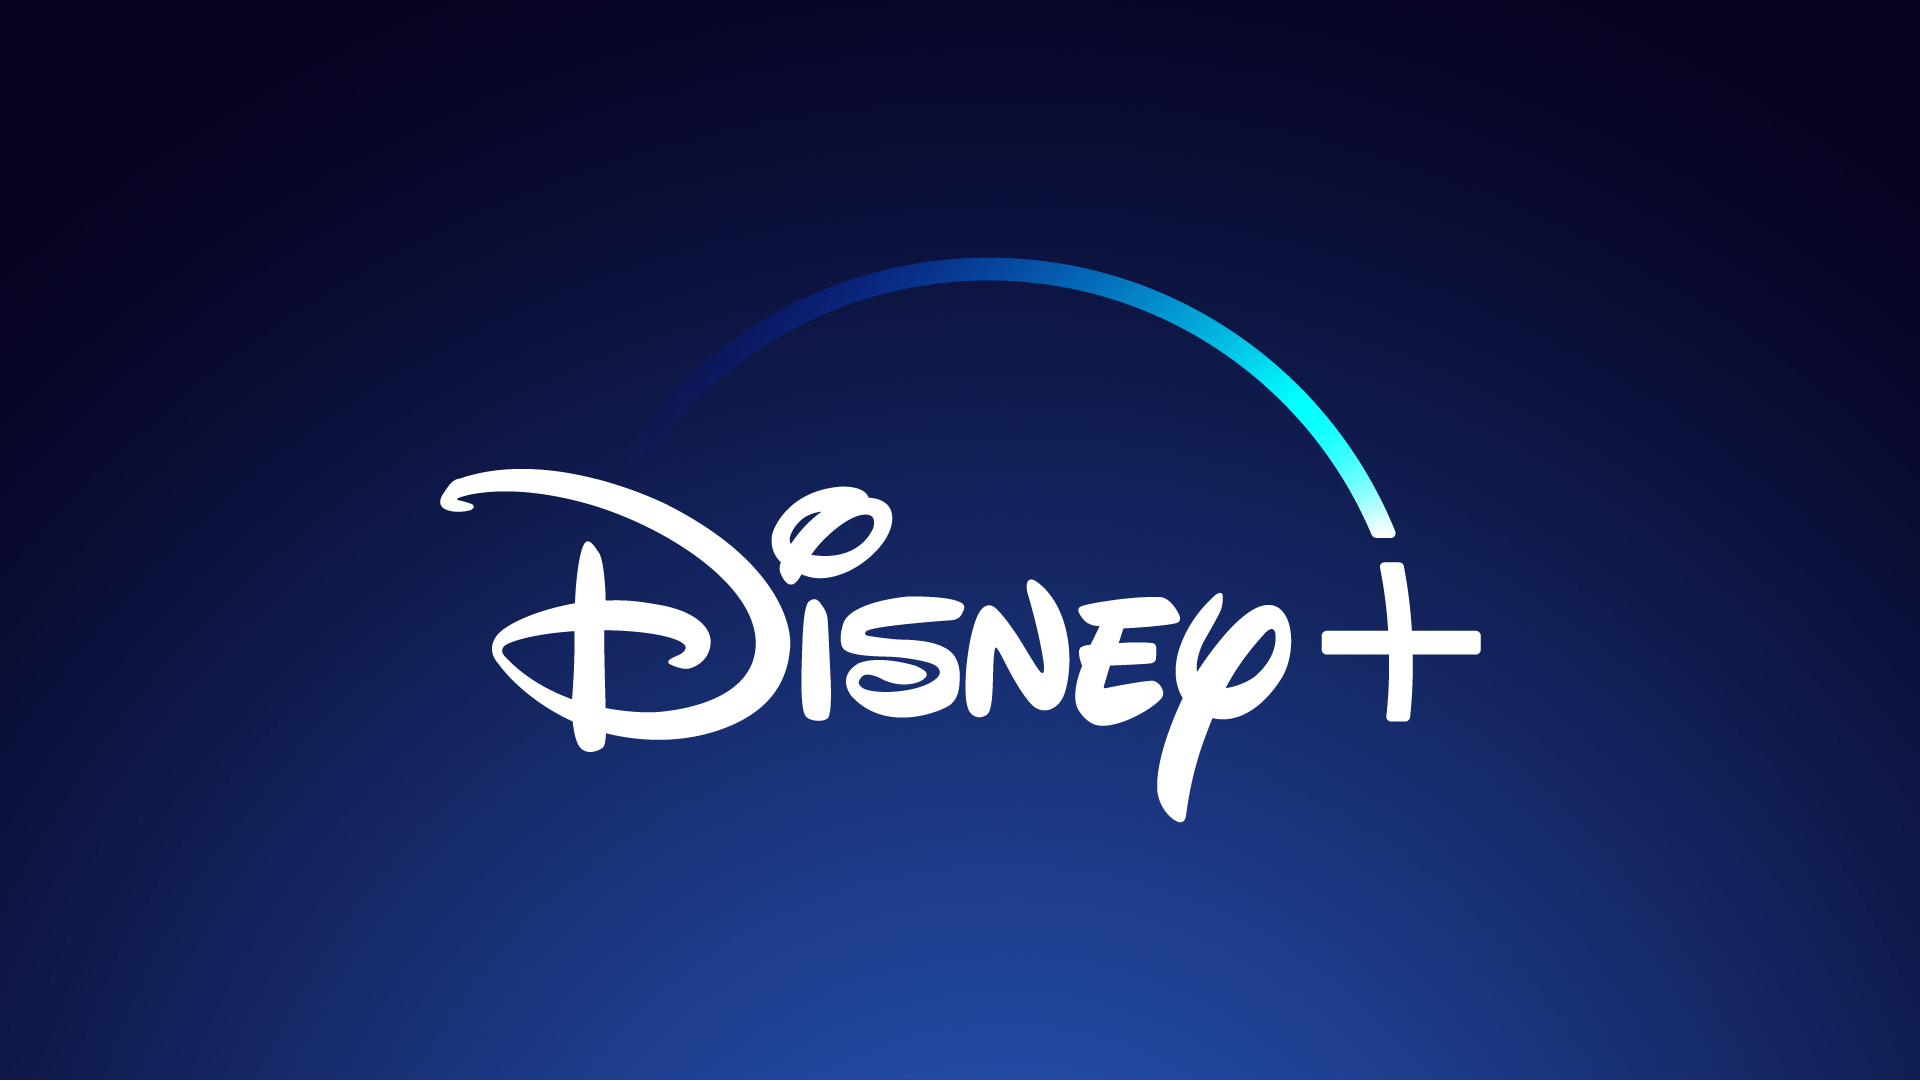 Verizon Announces Free Year of Disney+ For Customers